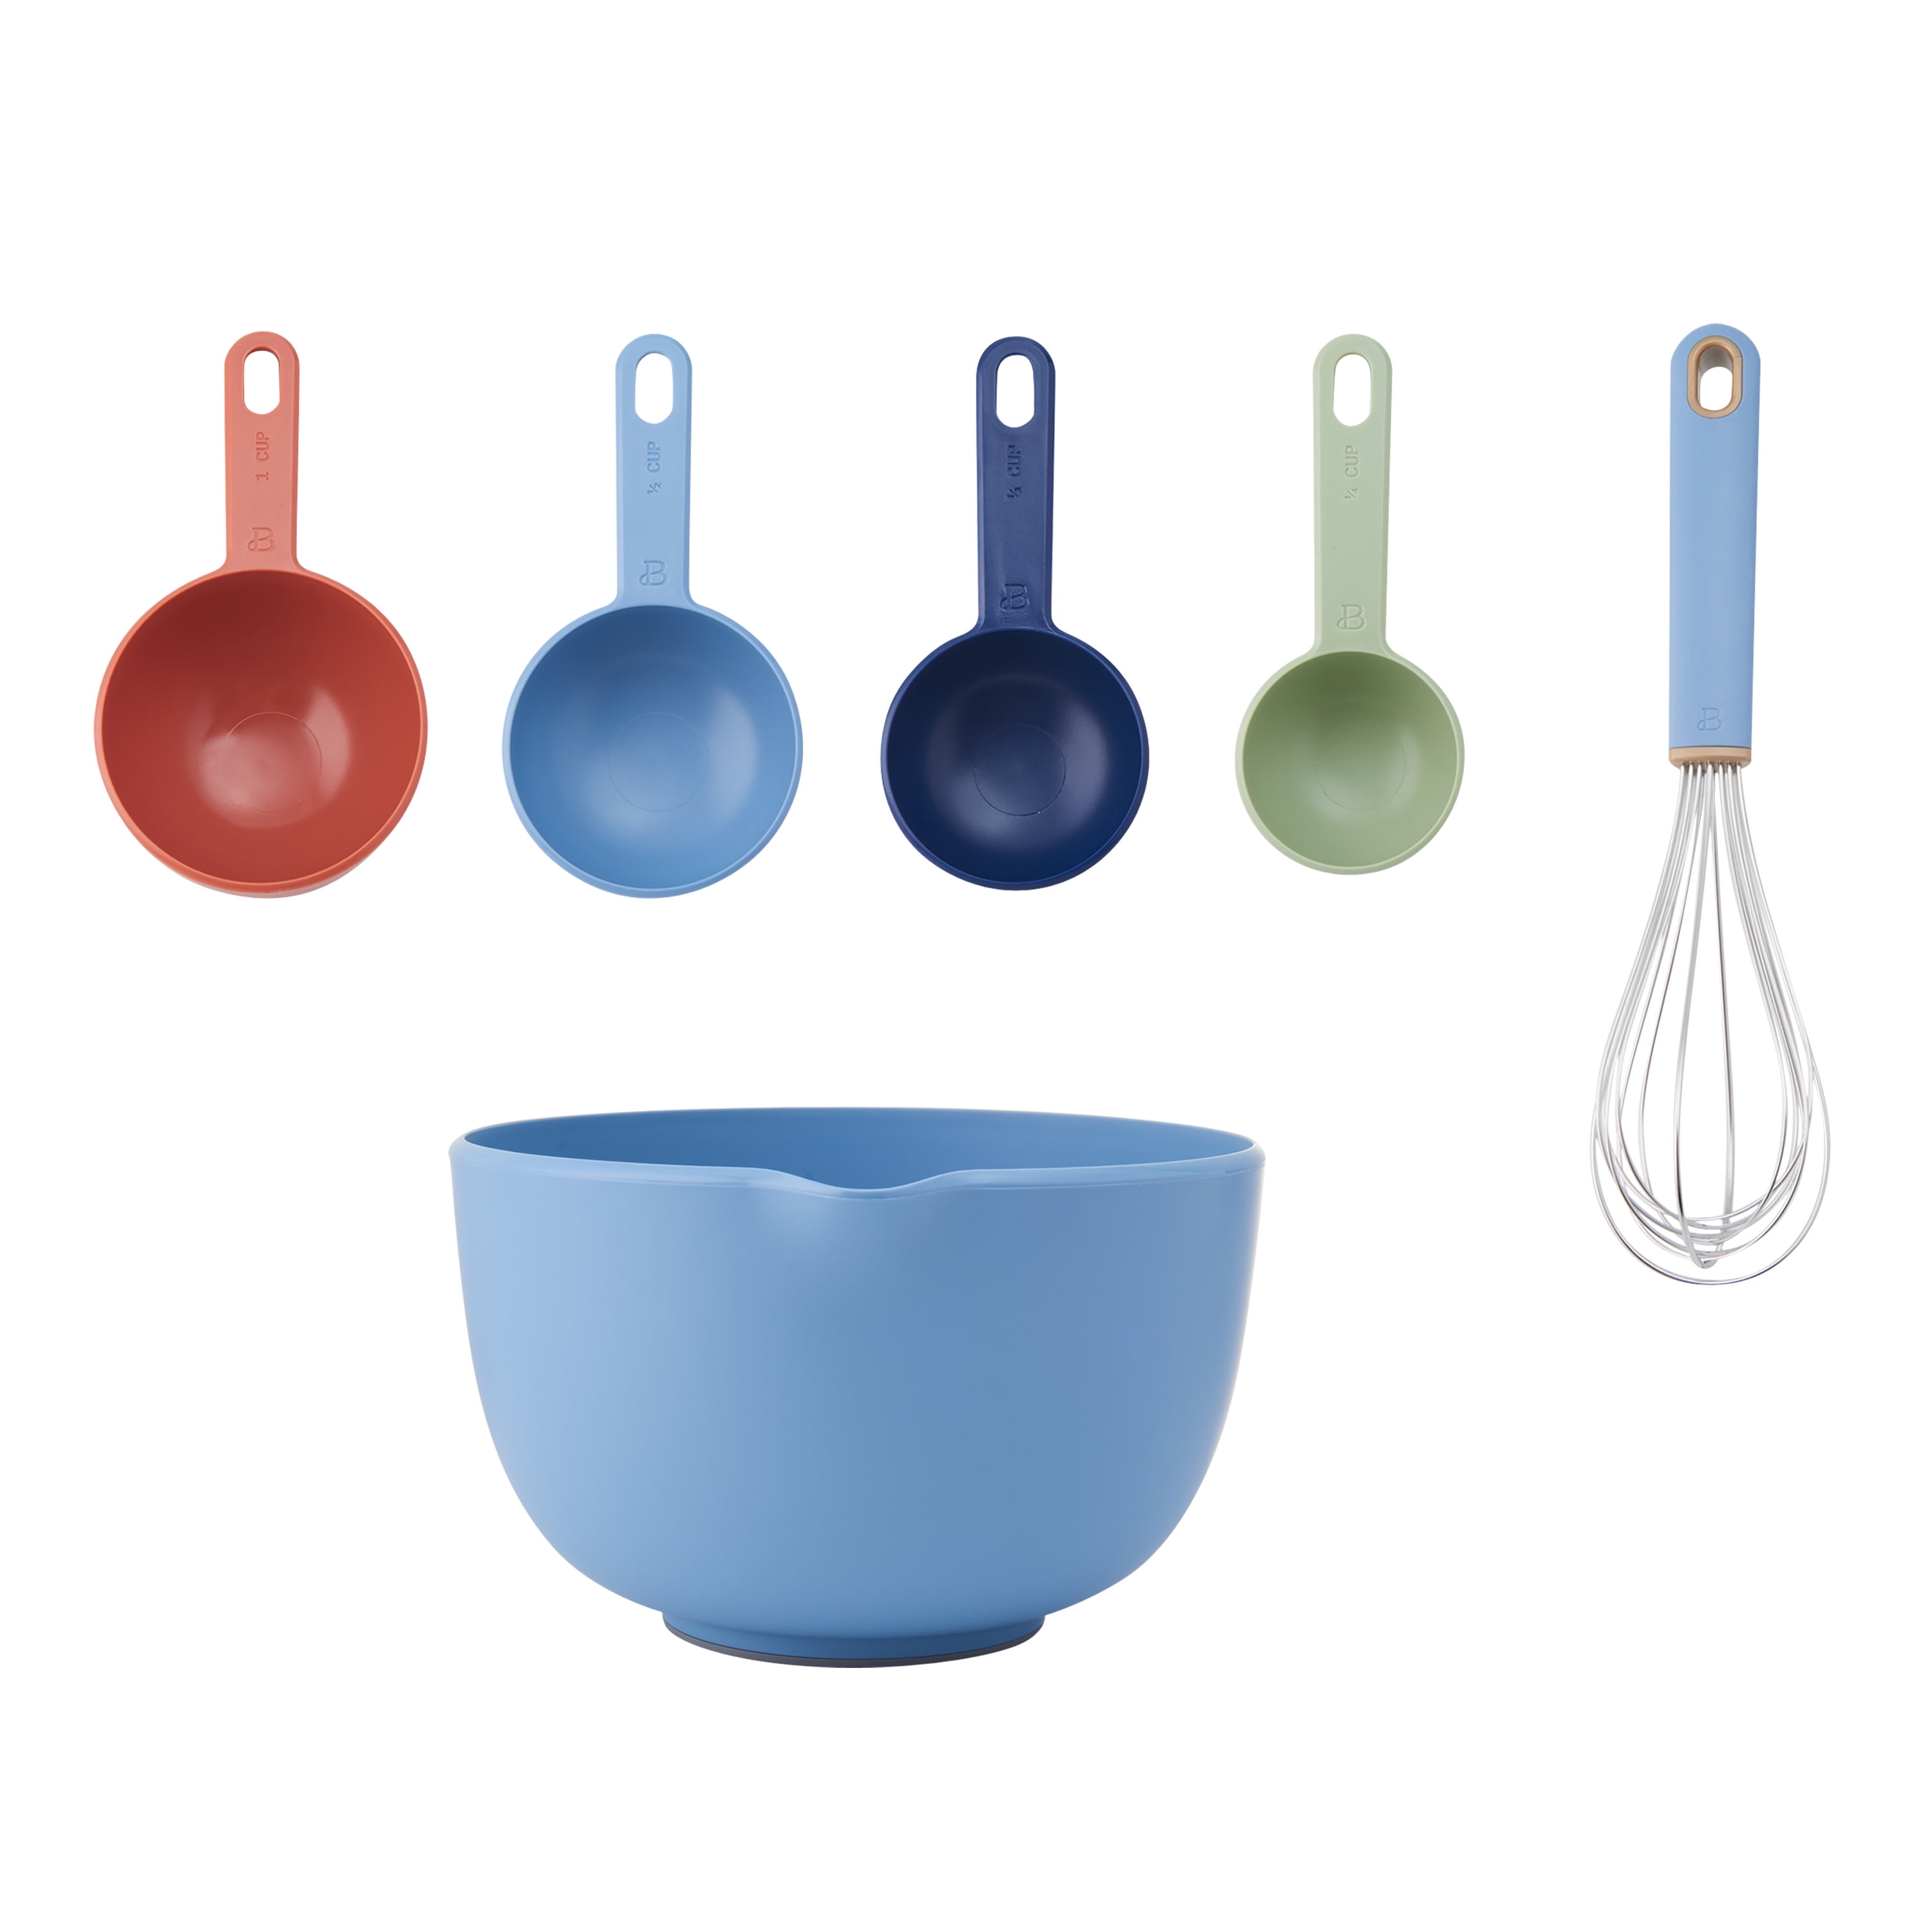 Beautiful 6-piece Essential Baking Set in Blue Icing by Drew Barrymore